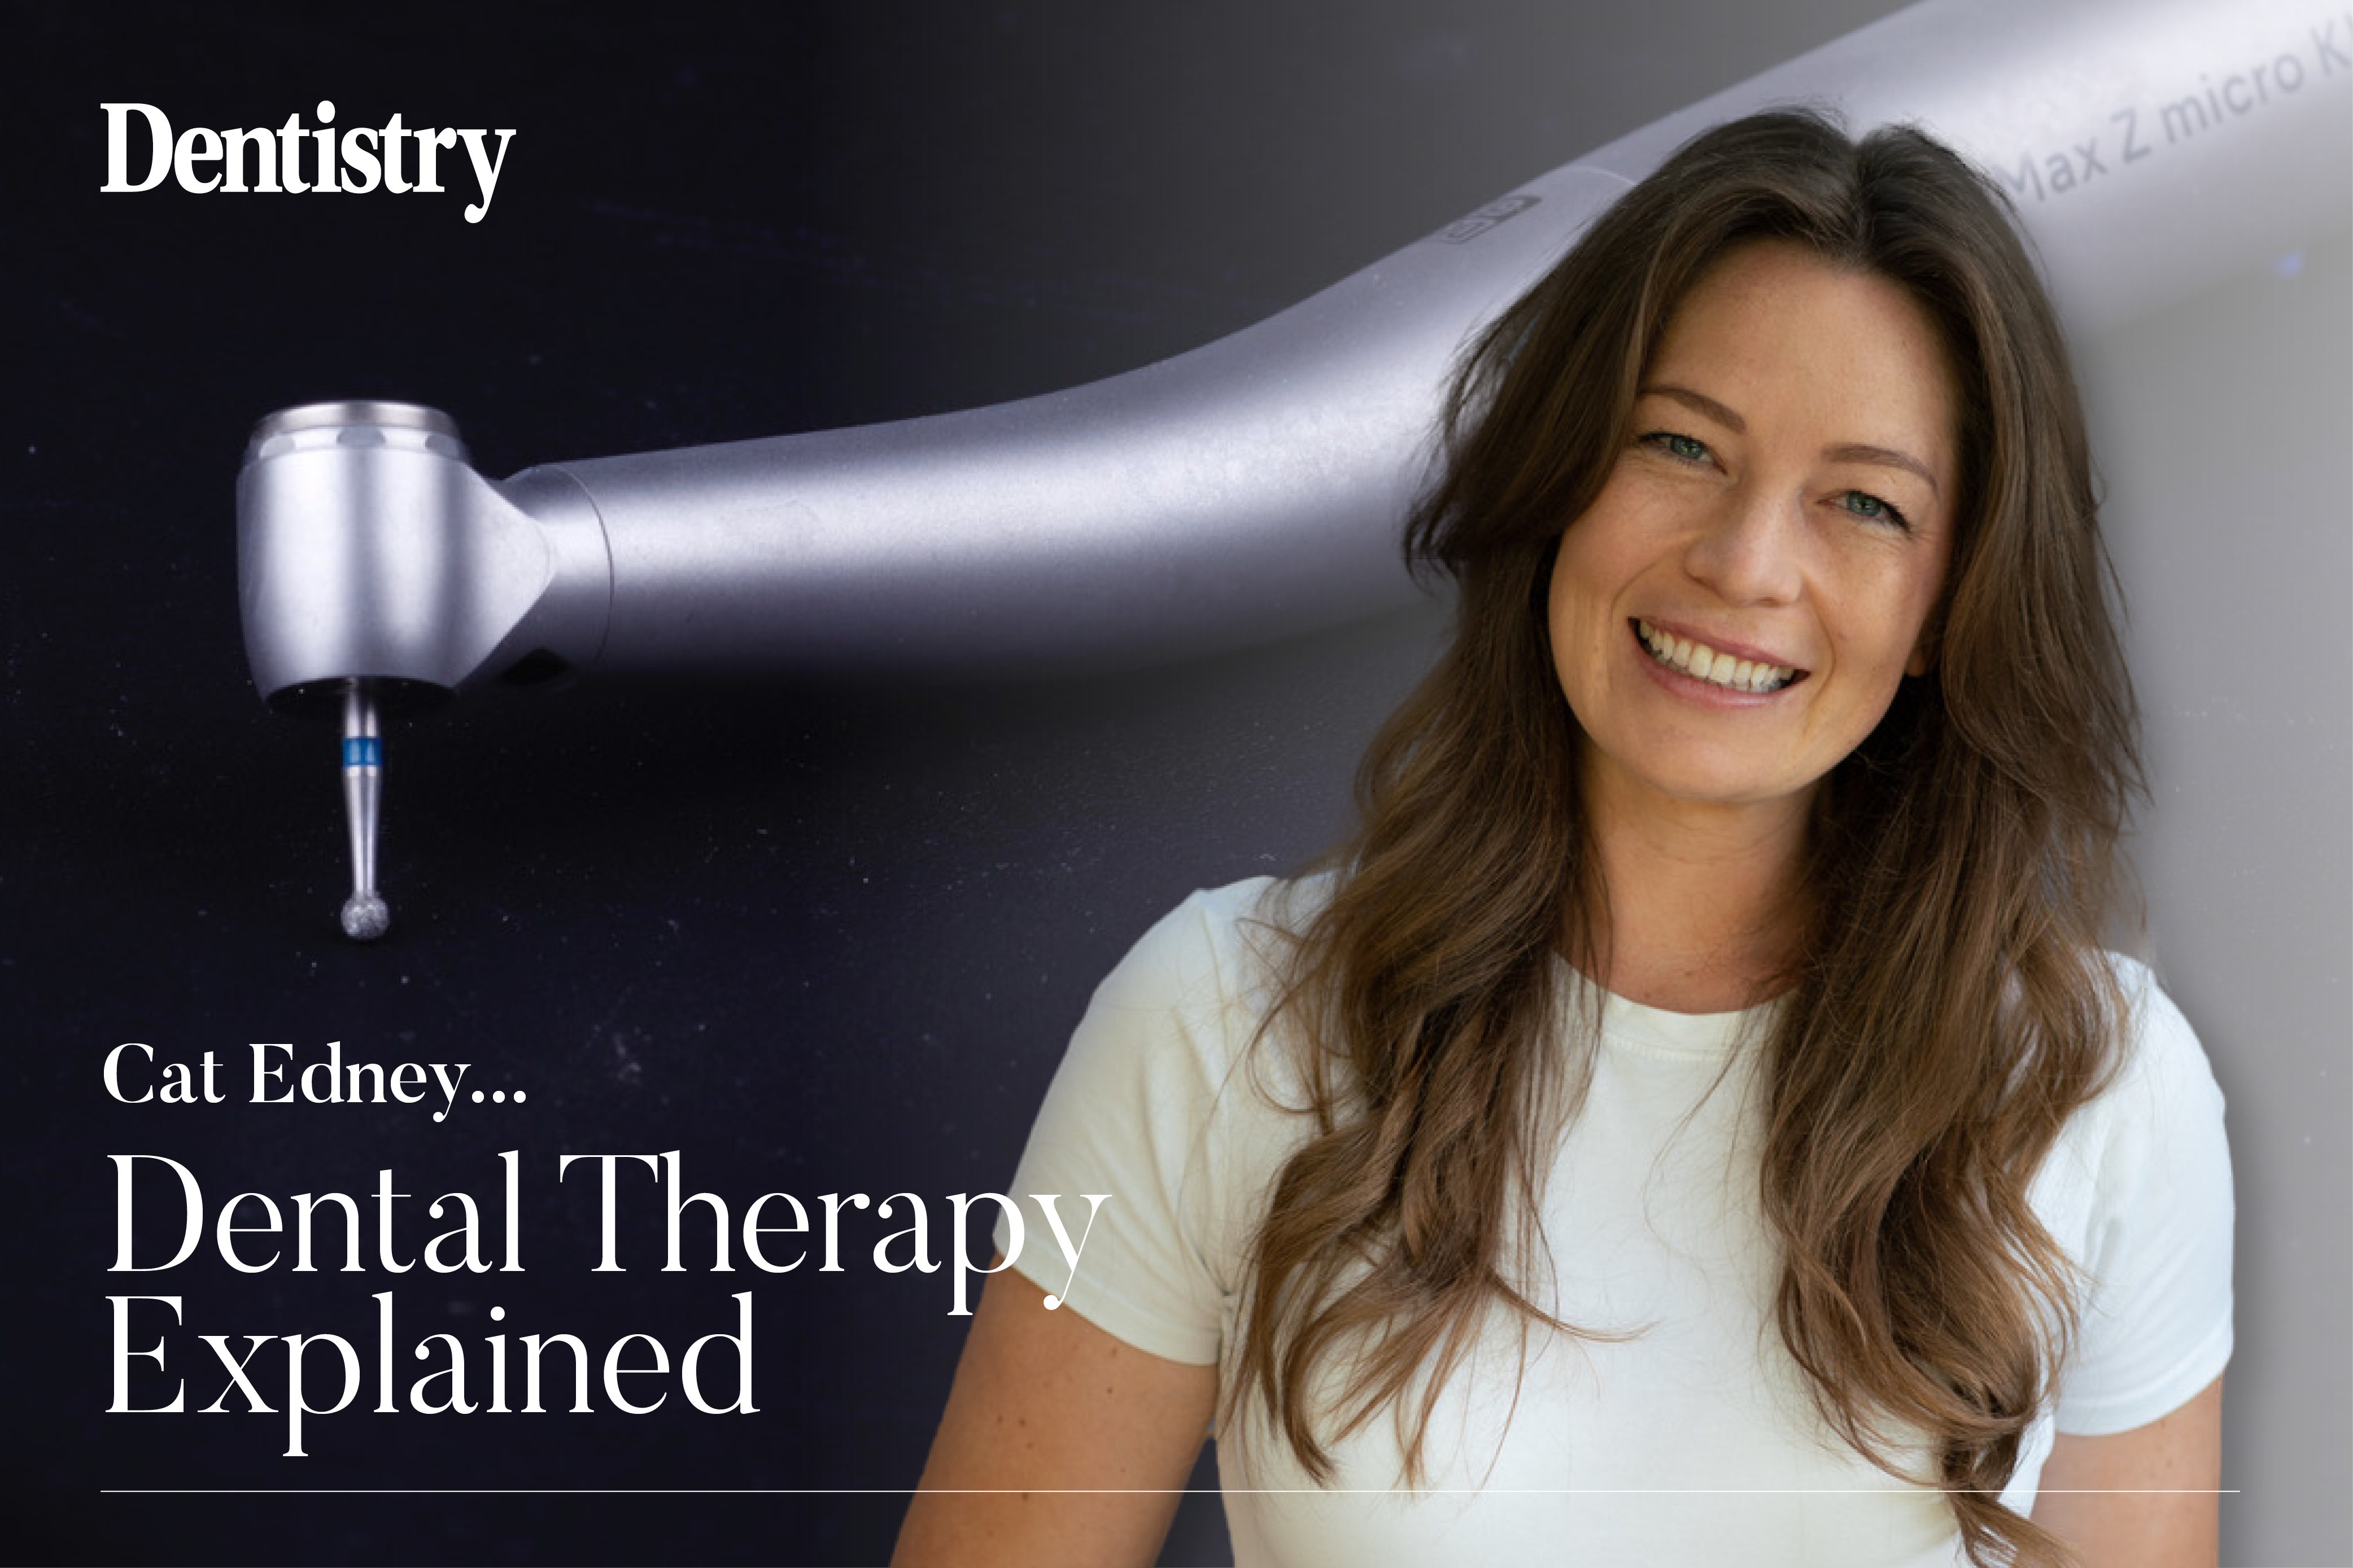 Cat Edney discusses the benefit of a dental therapist